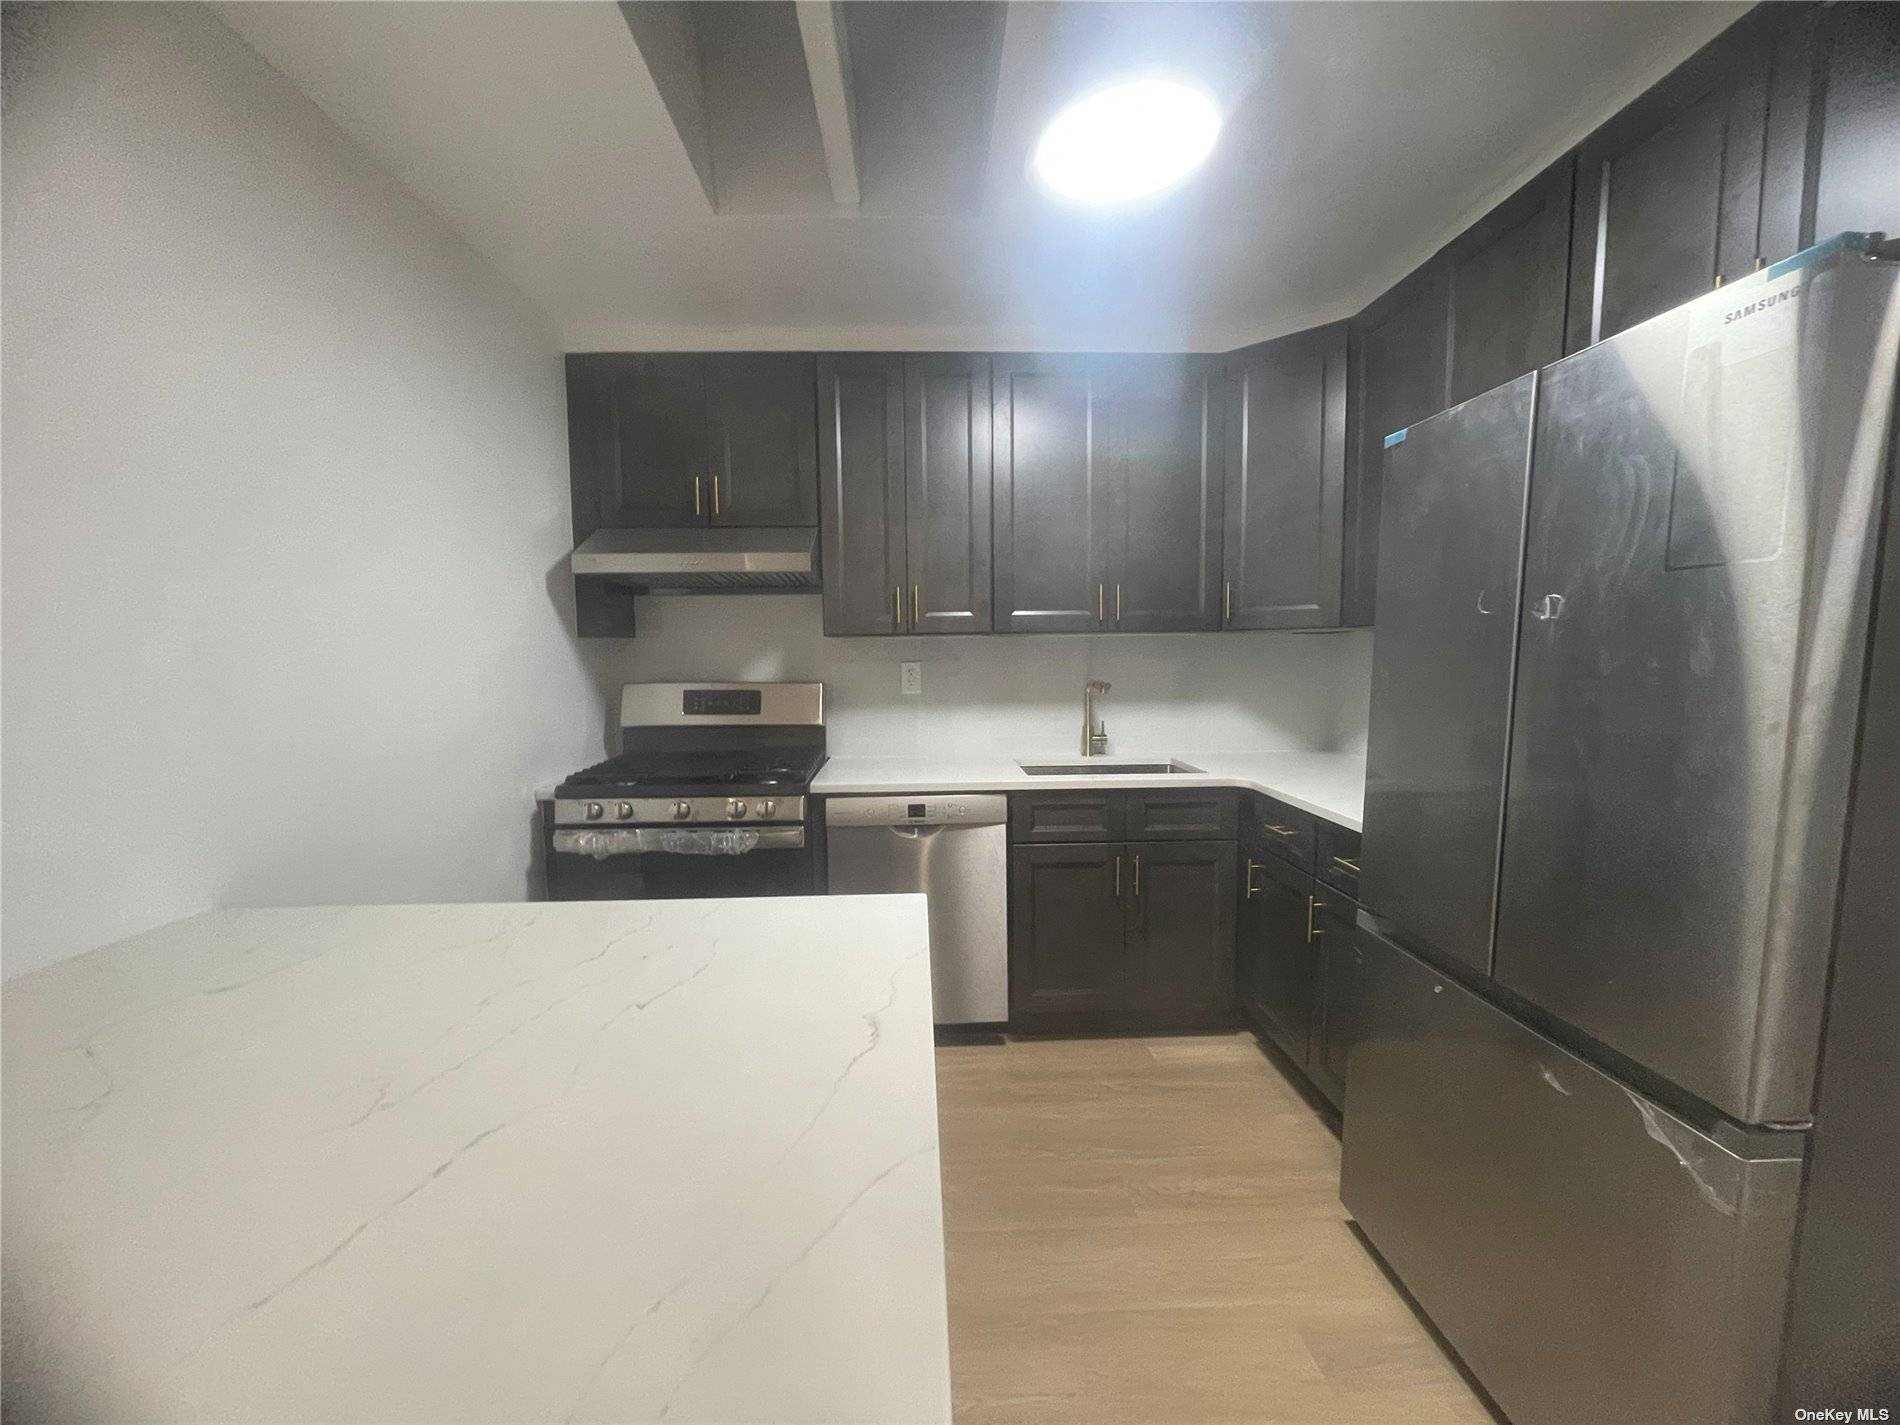 Superconvenient ! ! Beautiful Murray Hill New Renovated 3 bedrooms 2 bathrooms Apartment, 2 minutes walk to LIrr to Manhattan, half block to Northern Blvd !